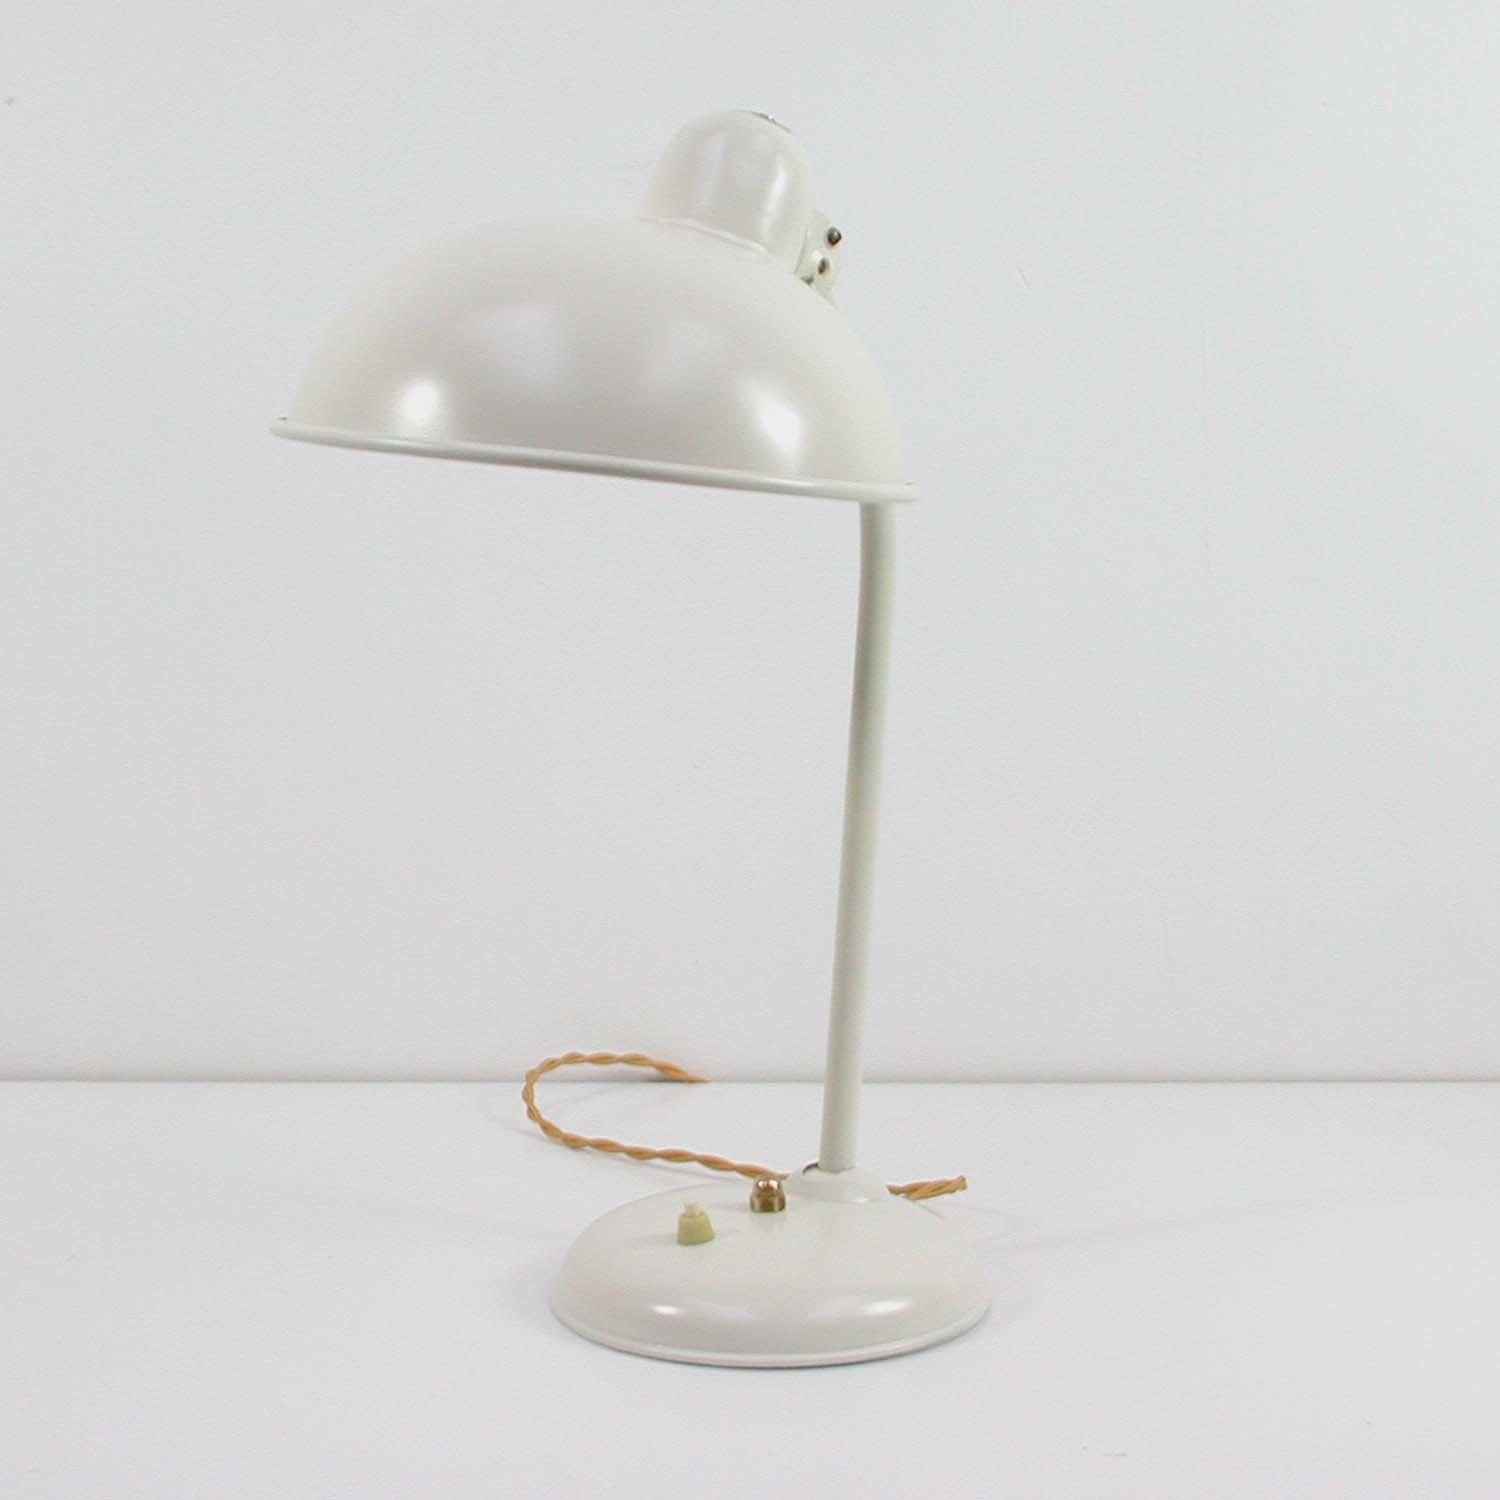 This cream colored vintage industrial desk lamp was manufactured in Germany in the 1940s-1950s by Helo Leuchten. 

It features an adjustable lamp arm and lampshade. The light is fully working and has been rewired with a gilt fabric cord for use in